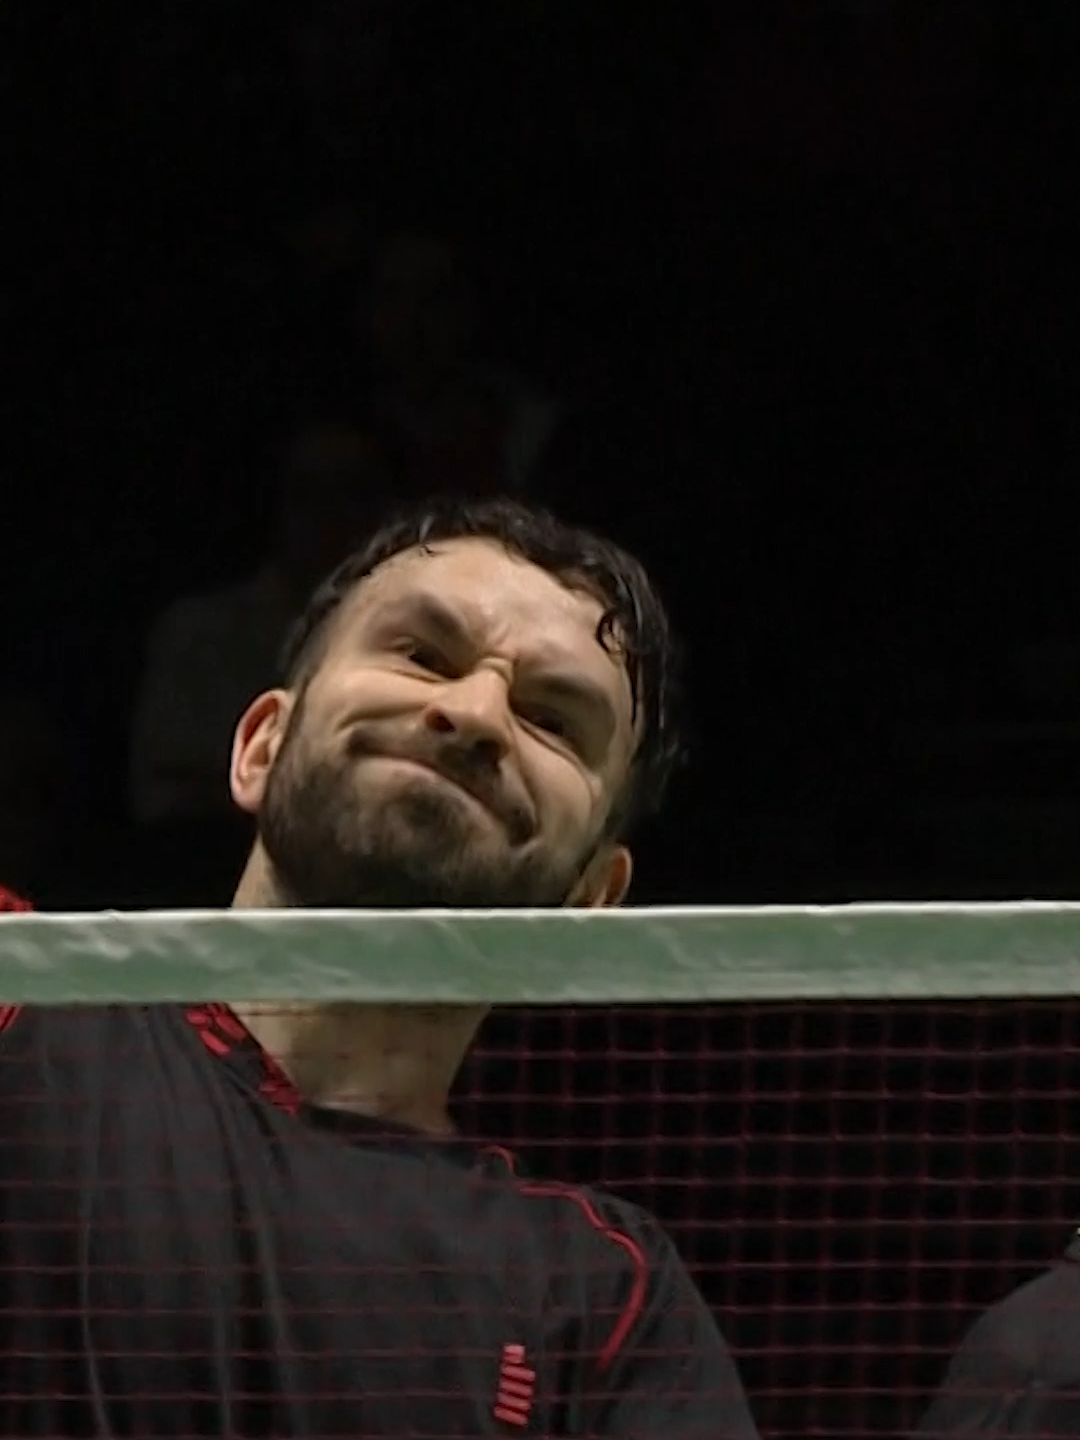 What are the chances? #Throwback to this crazy moment from Chris Langridge #bwf #badminton #badmintonfunny #badmintonengland